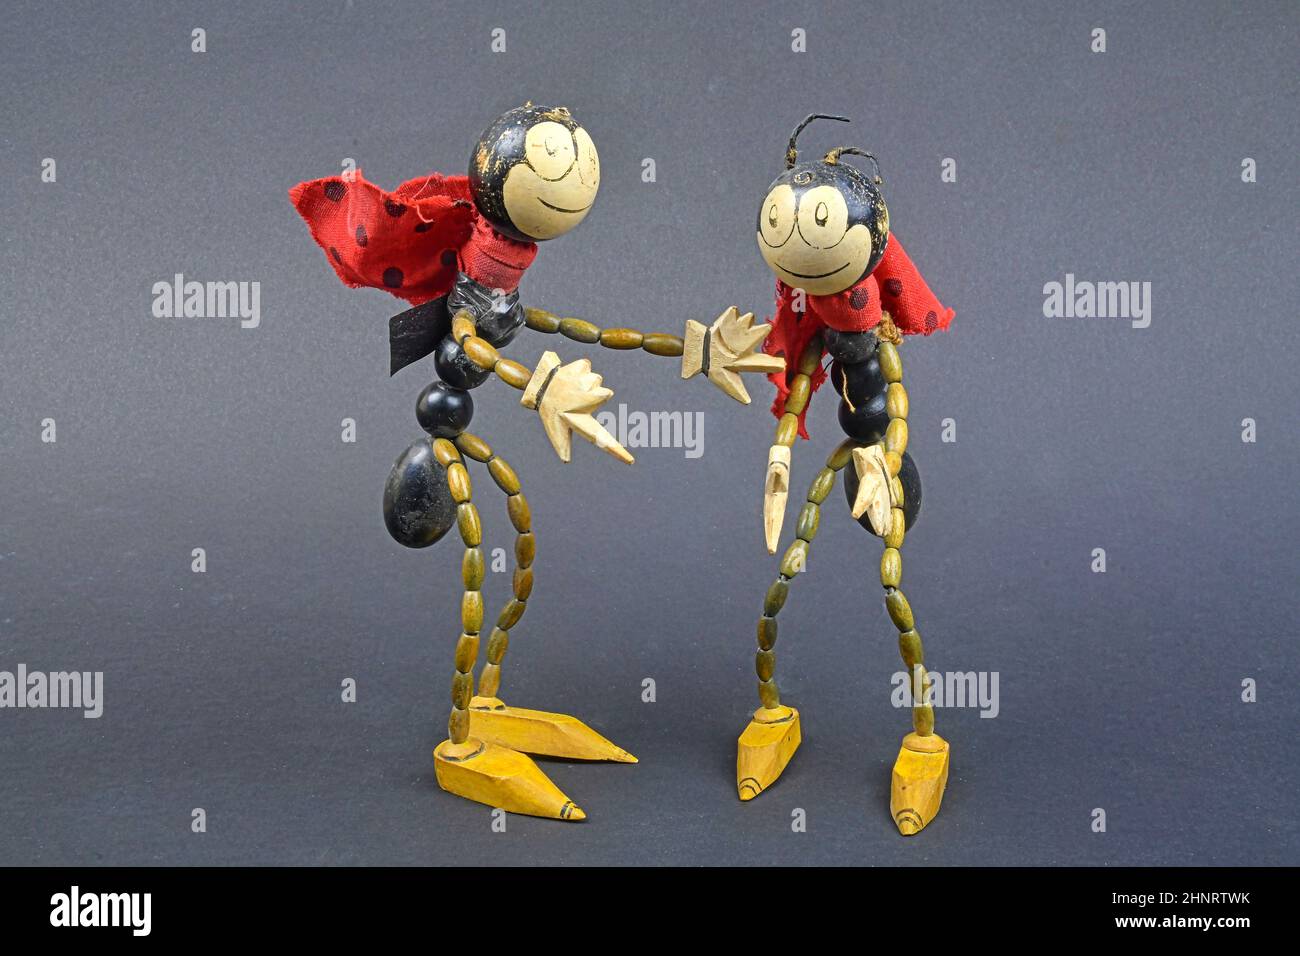 Traditional Czech toy Ferda Mravenec. Ferda Mravenec is a comic book, literary and film character of a sympathetic ant who appears in the comics and books of Ondrej Sekora and audiovisual works derived from them. Stock Photo